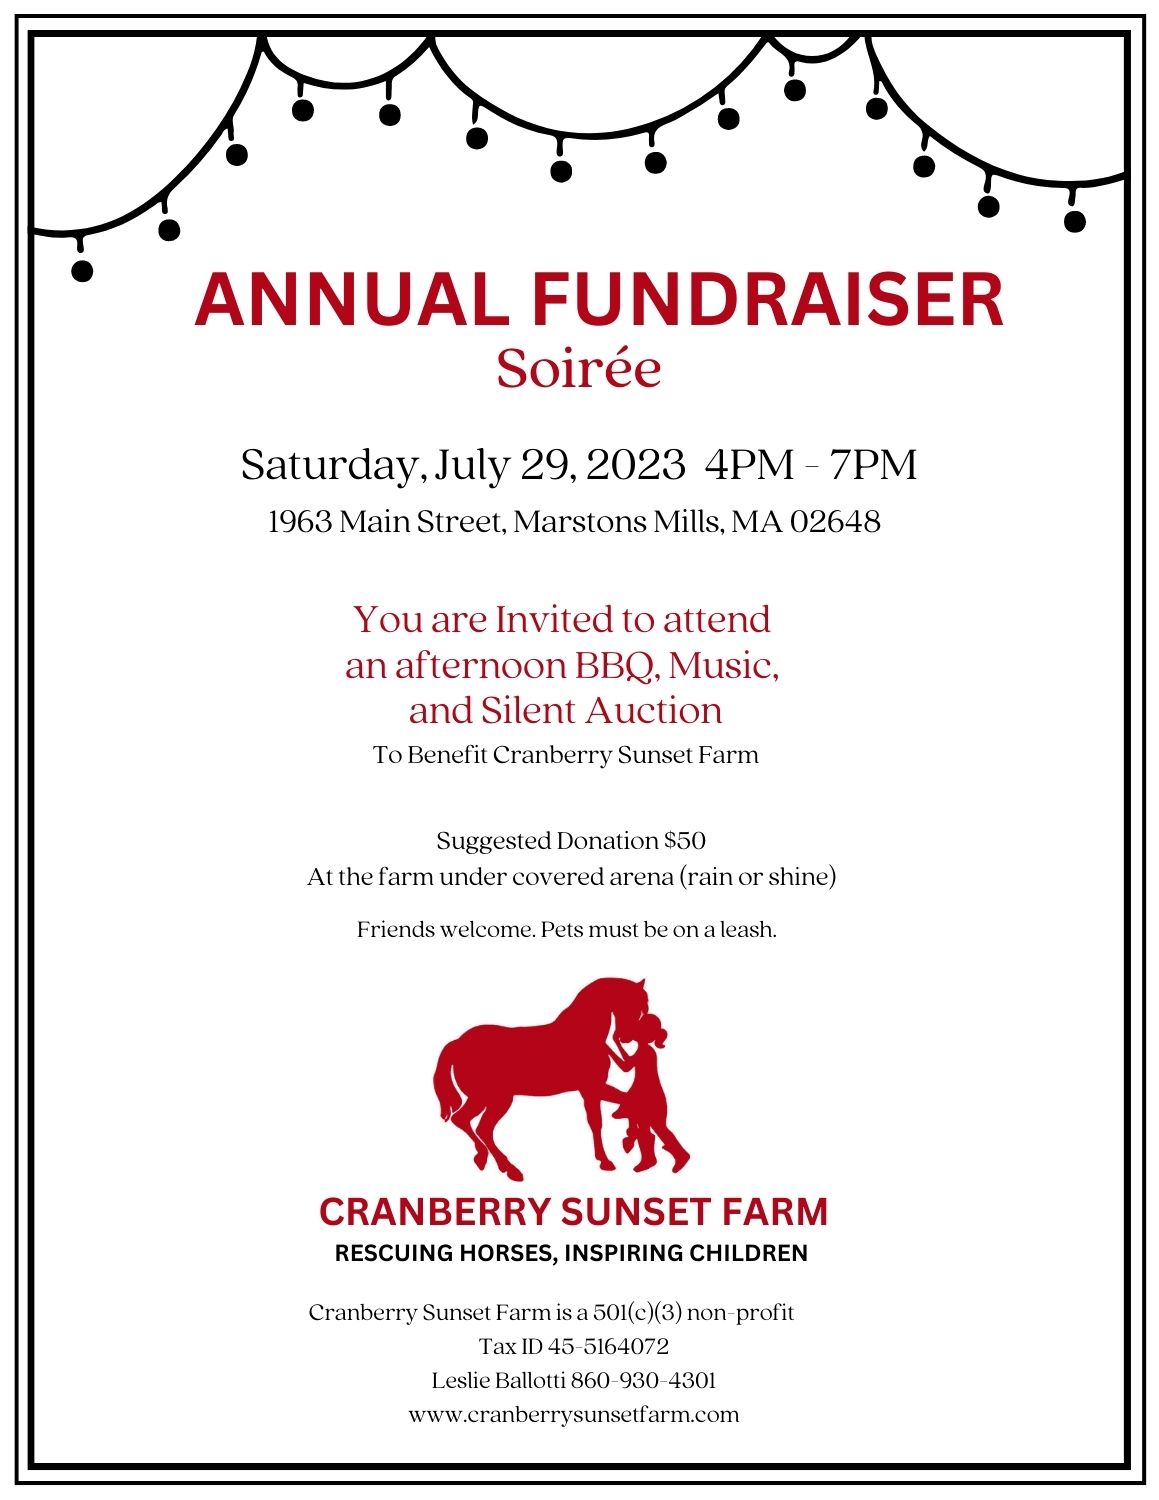 Cranberry Sunset Farms Annual Fundraiser Soiree